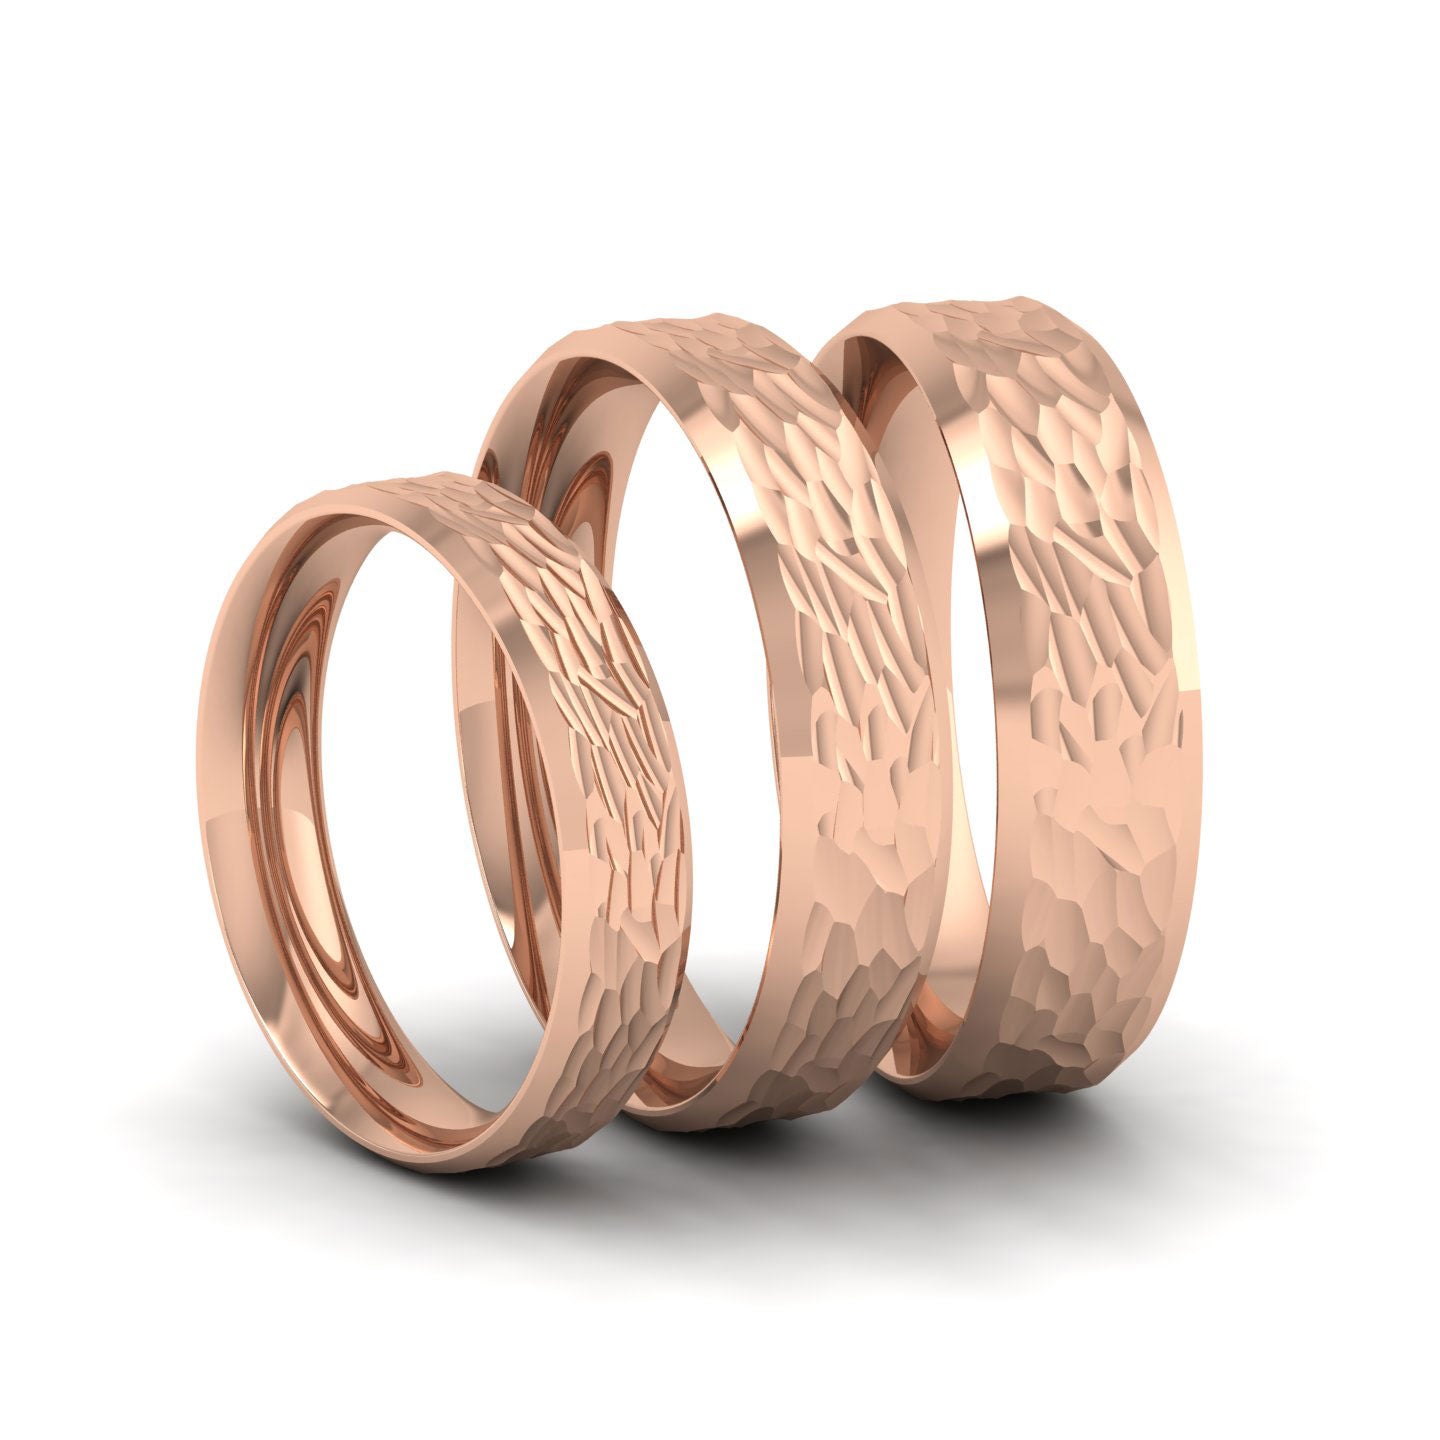 Bevelled Edge And Hammered Centre 18ct Rose Gold 4mm Wedding Ring